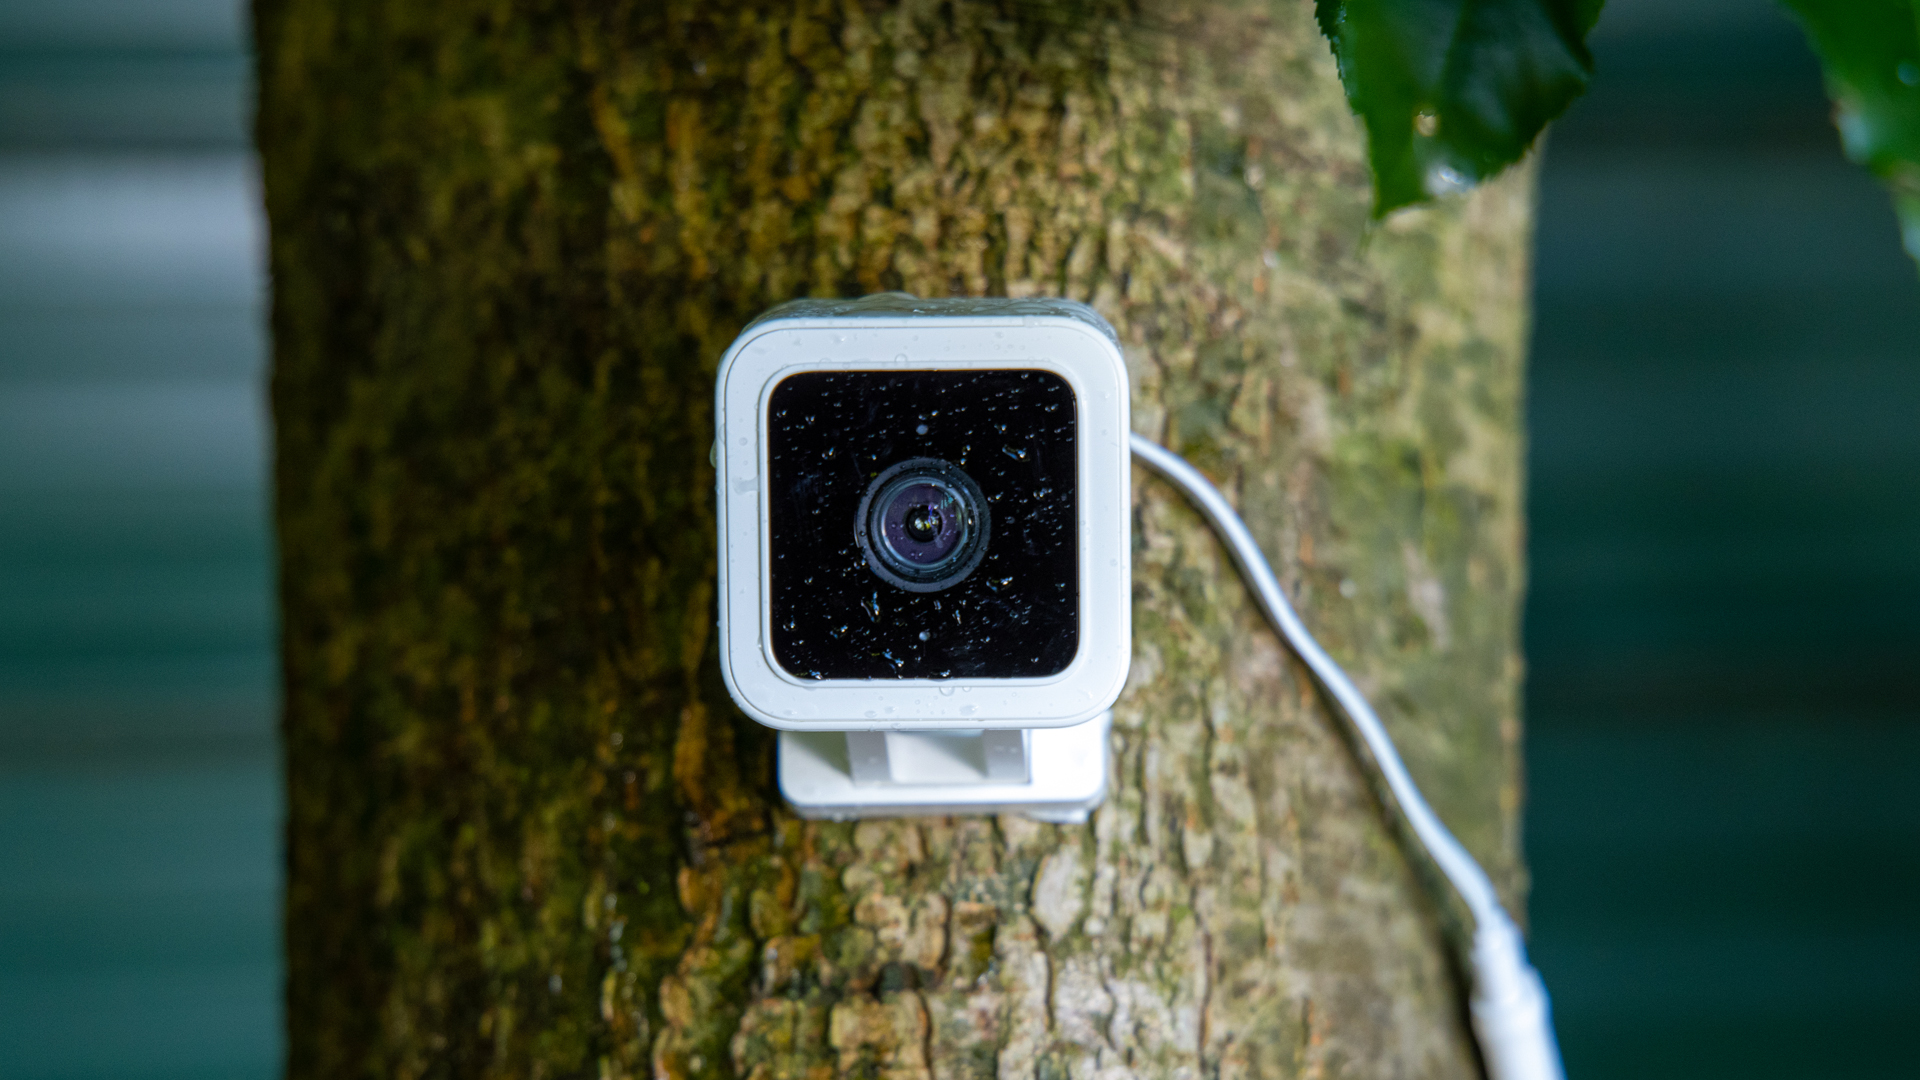 The Wyze Cam V3 mounted outdoors